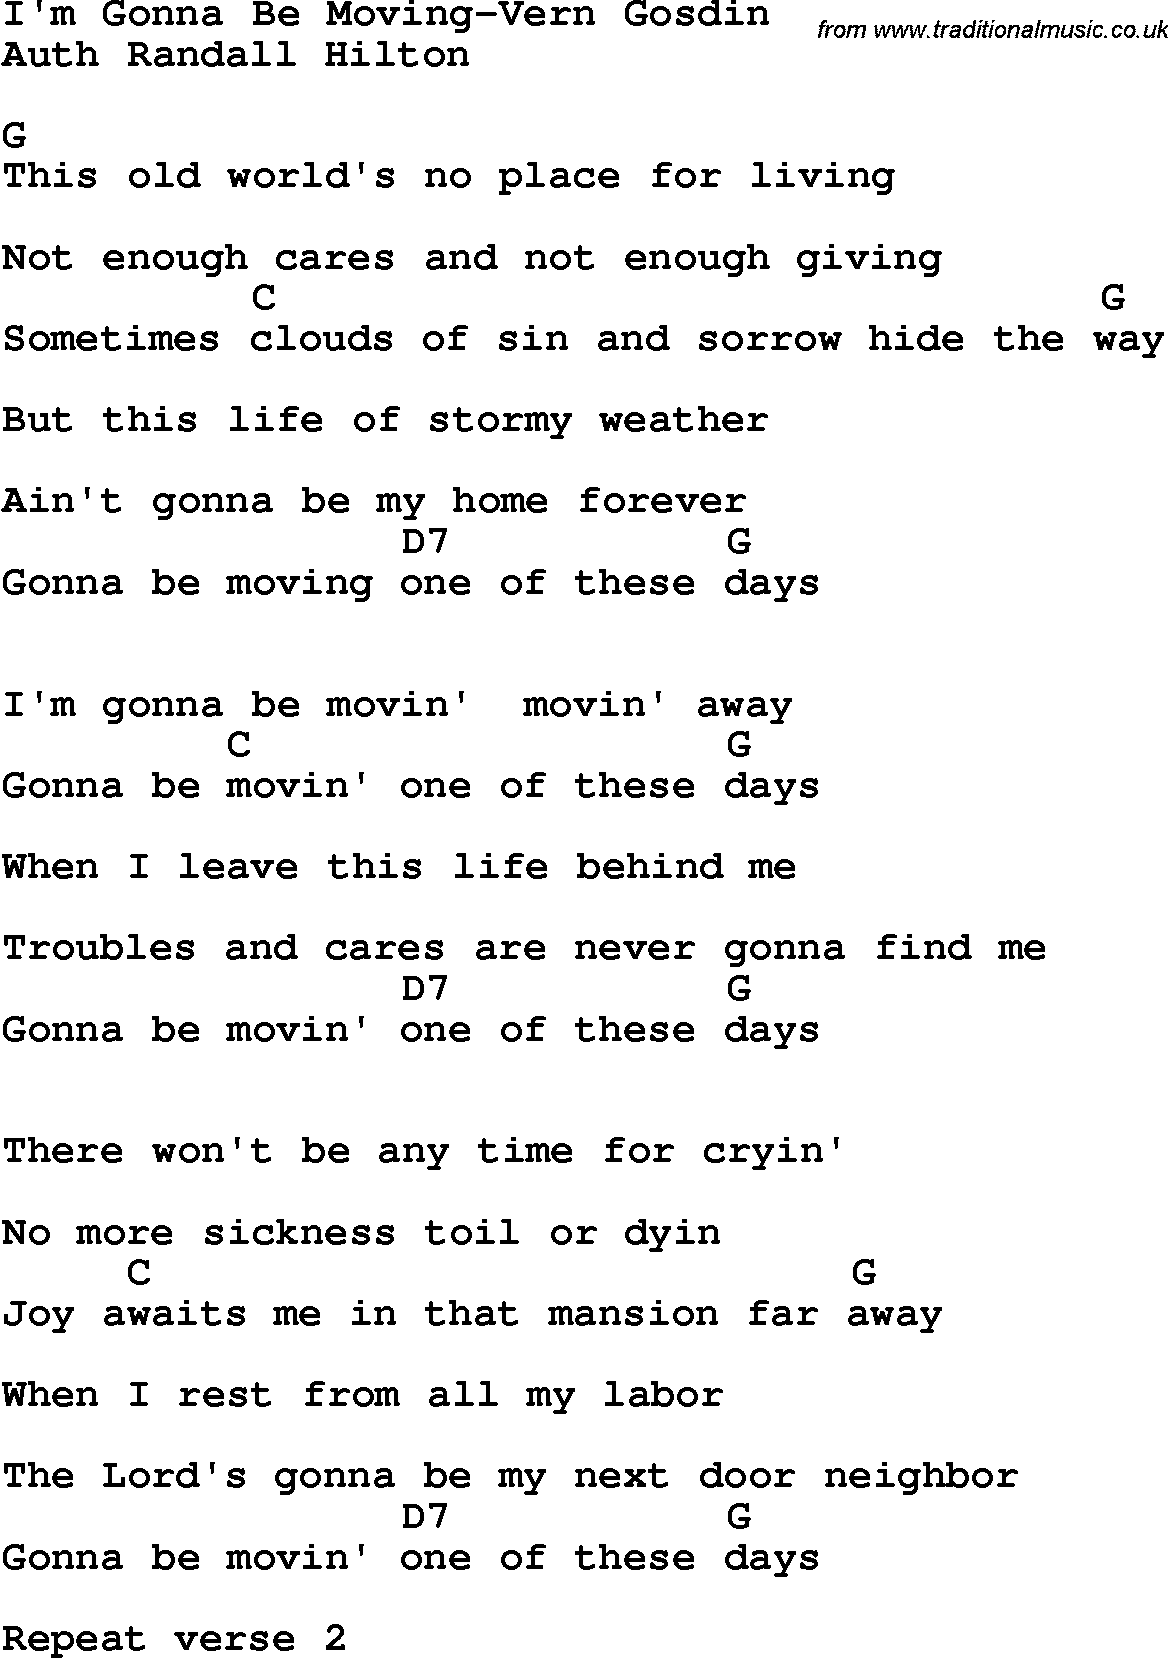 Country, Southern and Bluegrass Gospel Song I'm Gonna Be Moving-Vern Gosdin lyrics and chords